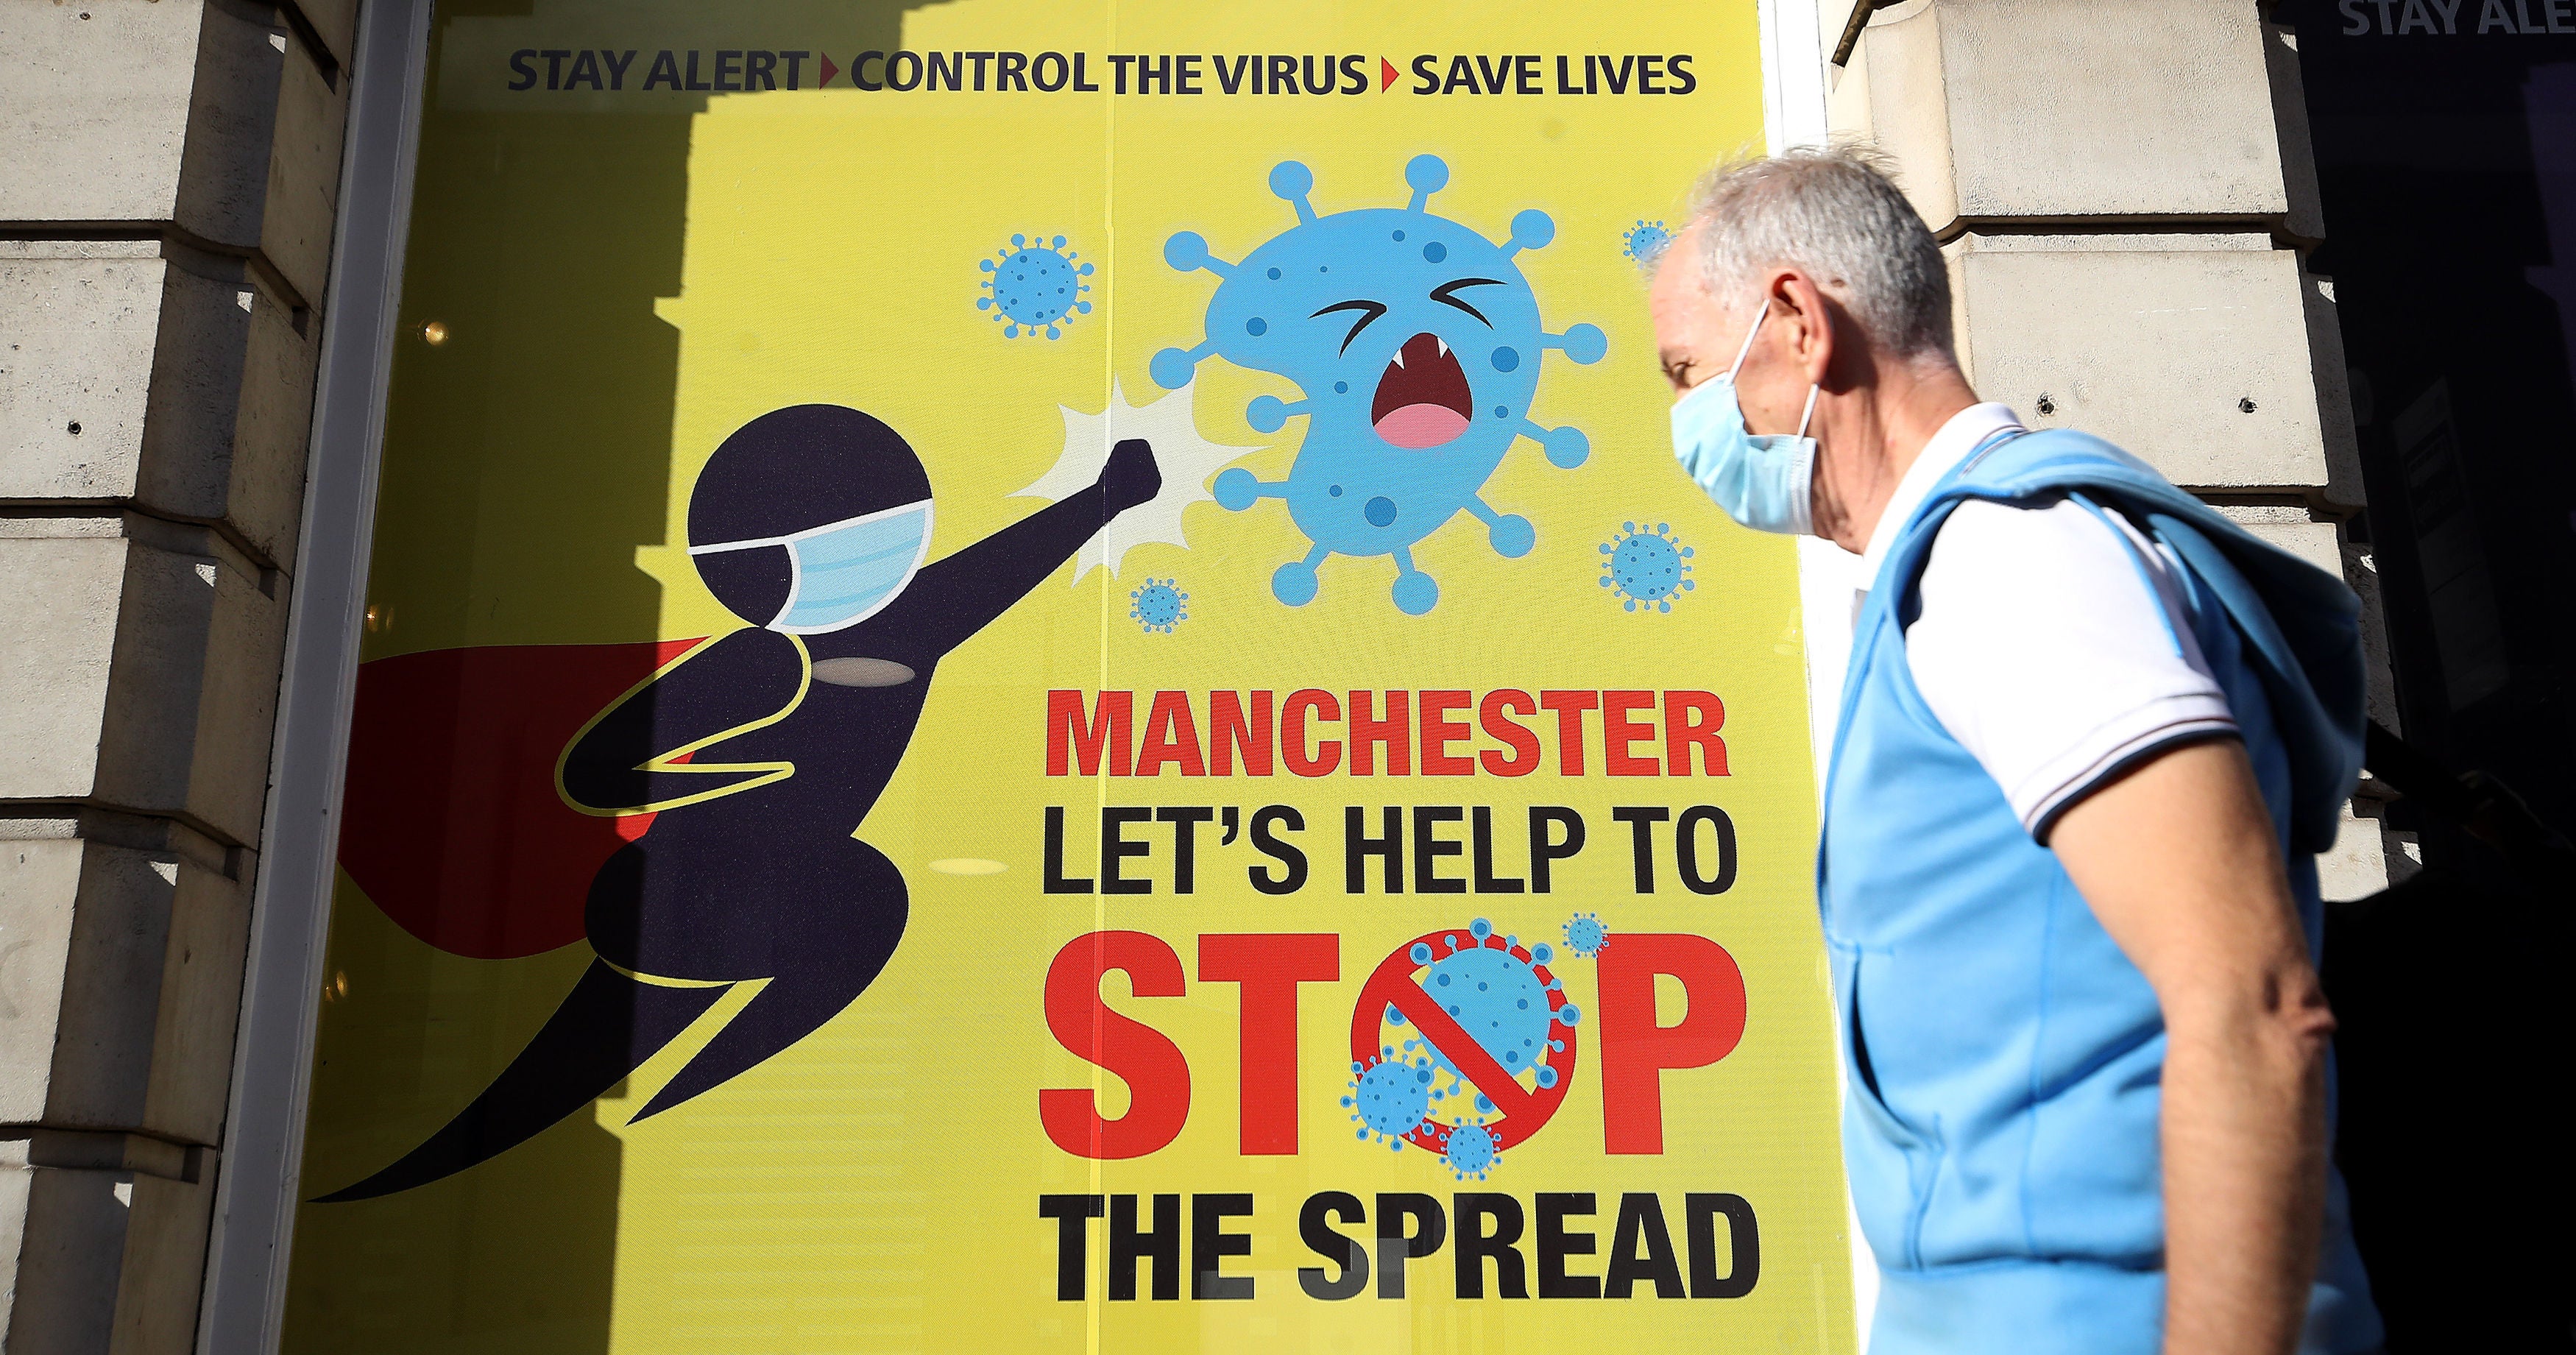 A public health poster in Manchester